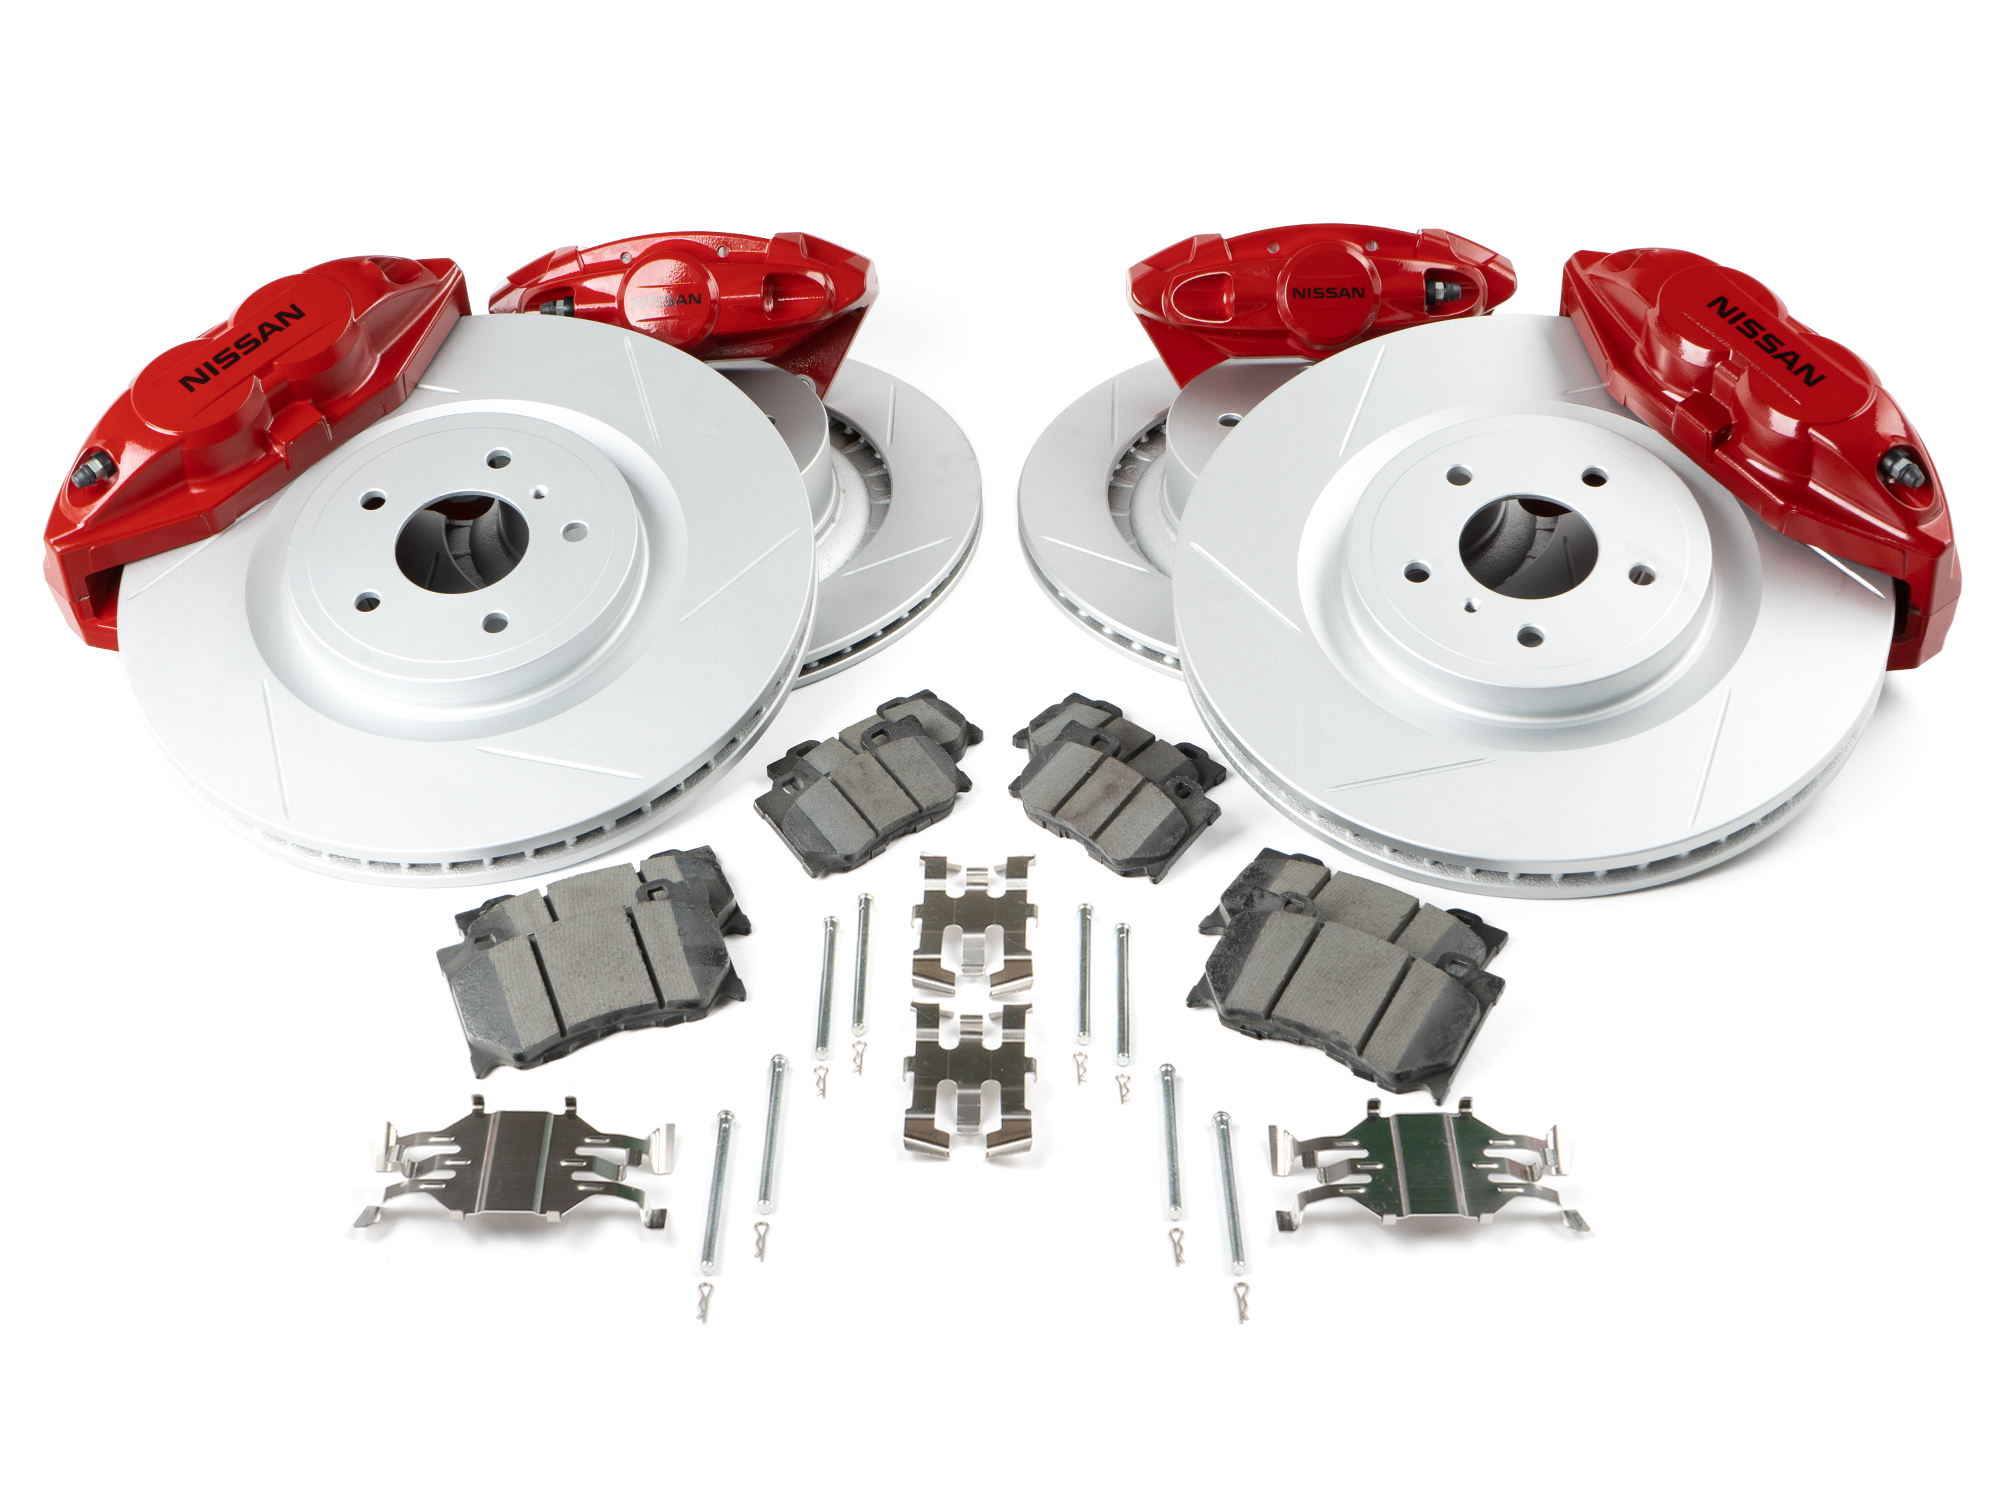 Quiet Low Dust 4 Ceramic Pads Performance Kit FRONT REAR Powder Coated Red Calipers + 8 Rotors 4 